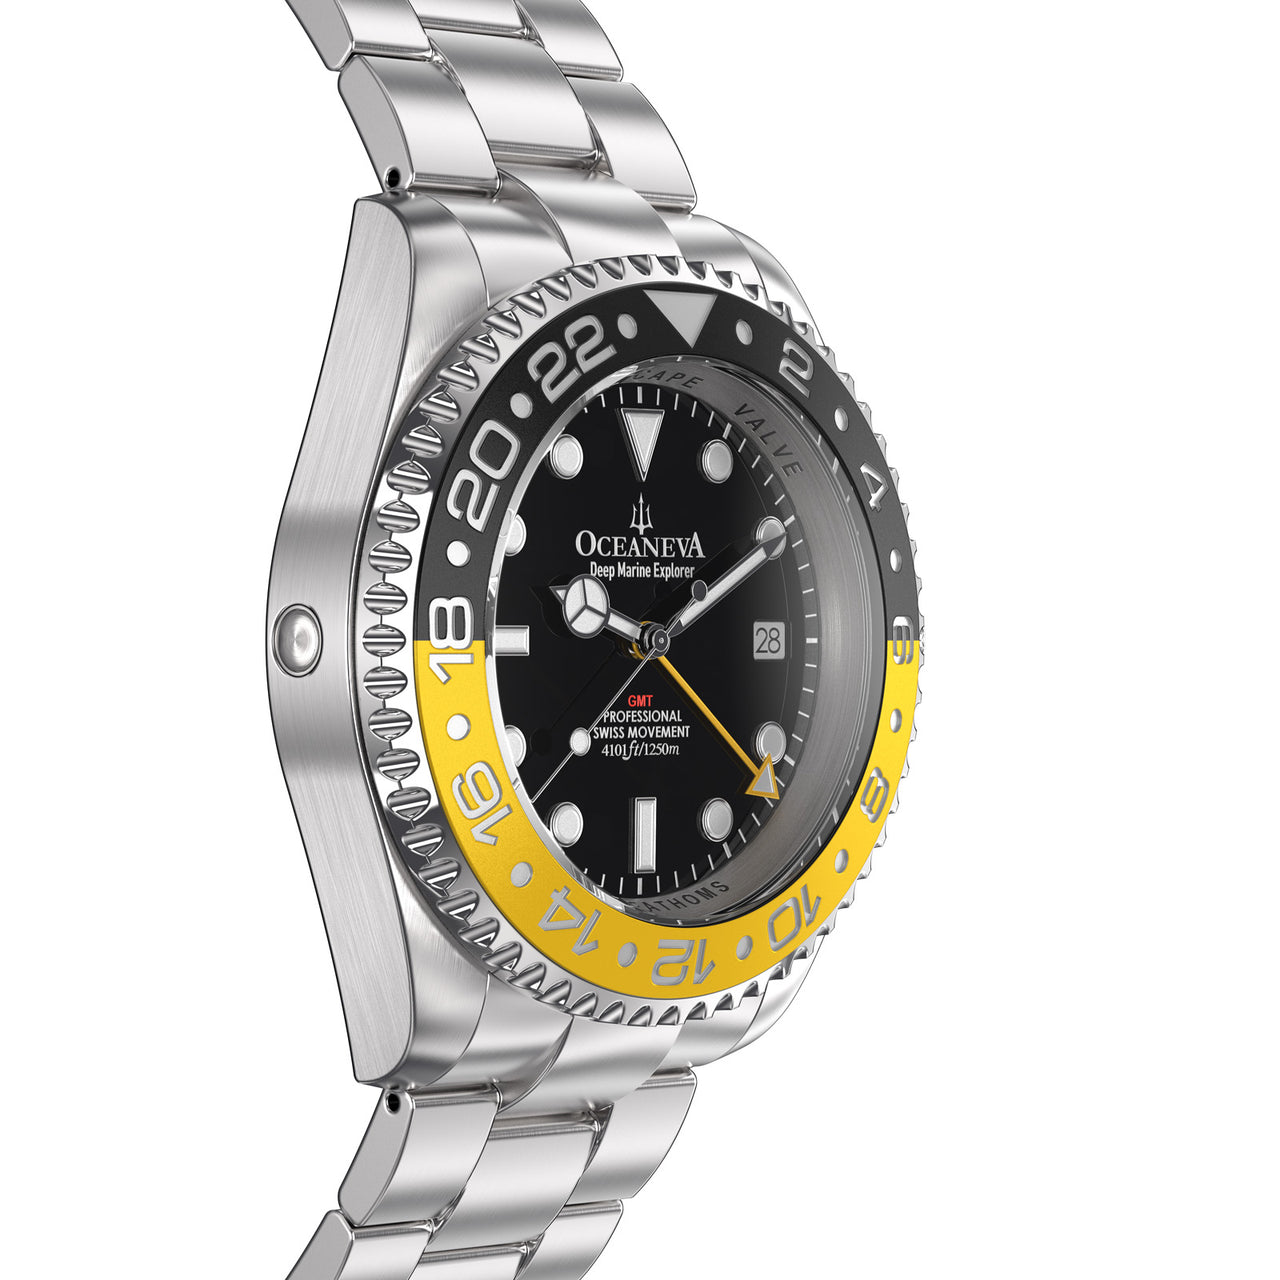 Oceaneva 1250M GMT Dive Watch Black And Yellow Side Helium Escape Valve View